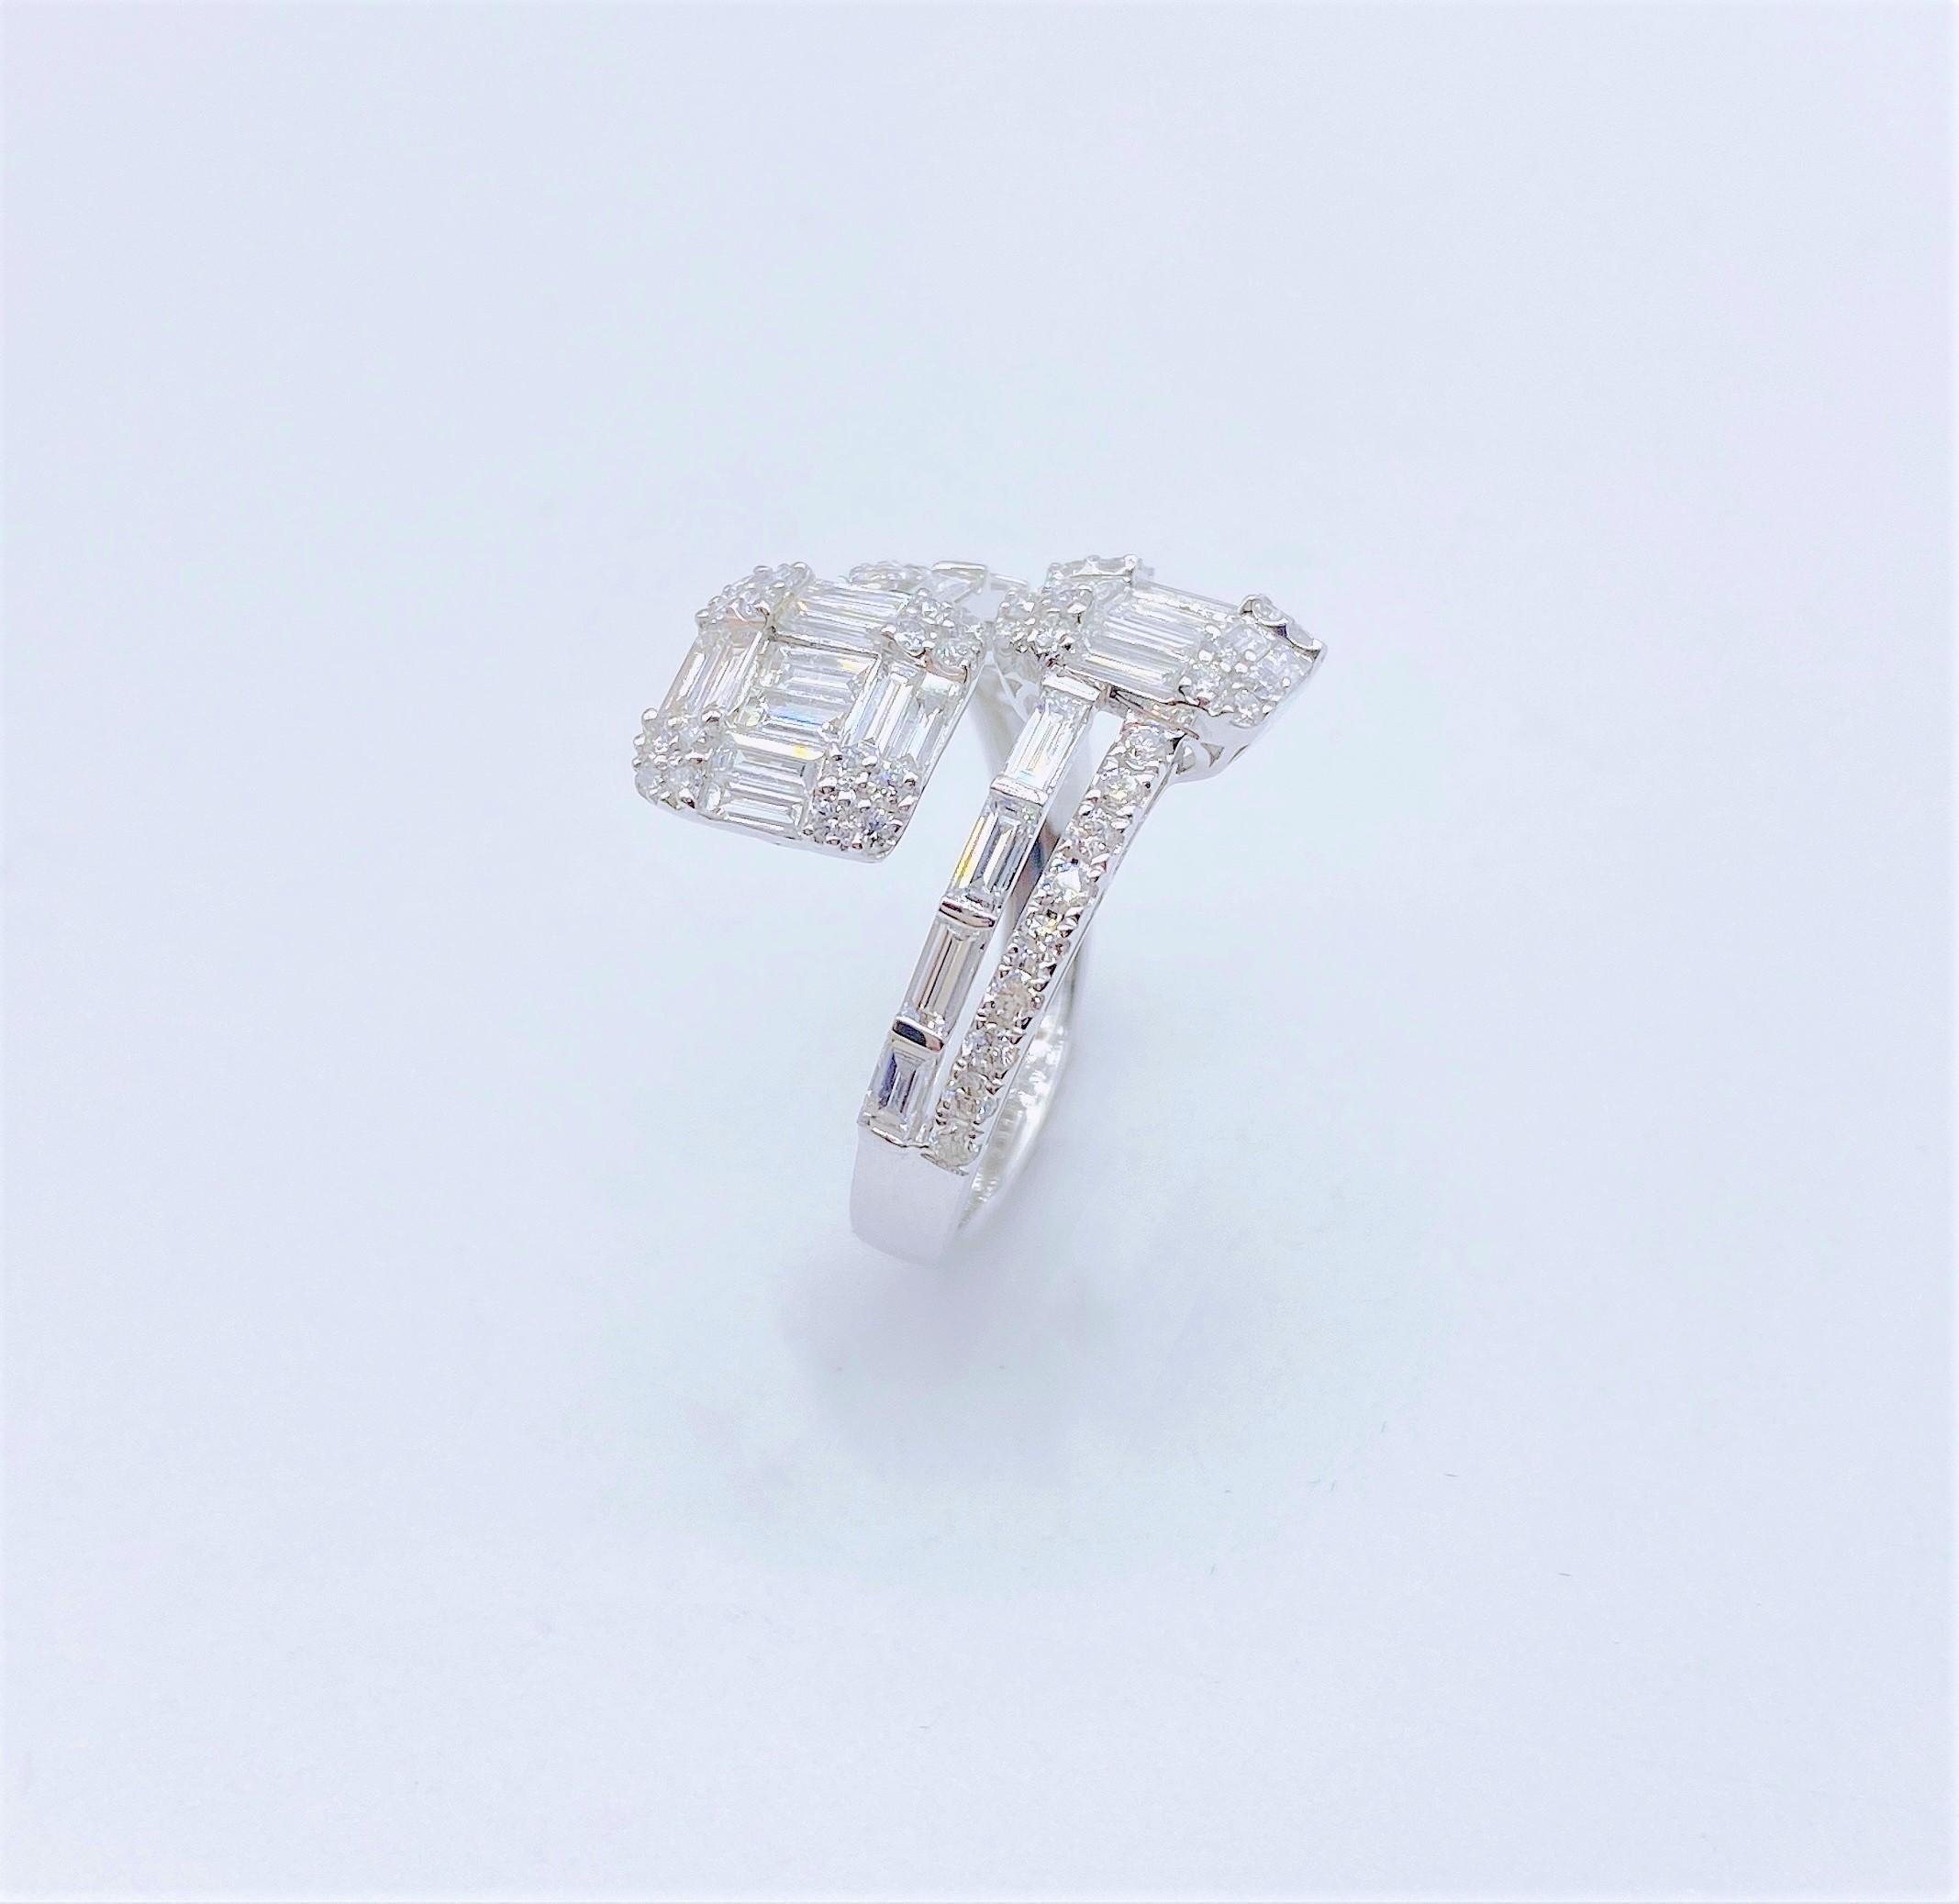 The Following Item we are offering is this Beautiful Rare Important 18KT White Gold Glittering Diamond Crossver Ring. Ring is comprised of Approx 1.50CTS of Magnificent Rare Gorgeous Fancy Trillion Baguette Cut Diamonds with Round Glittering